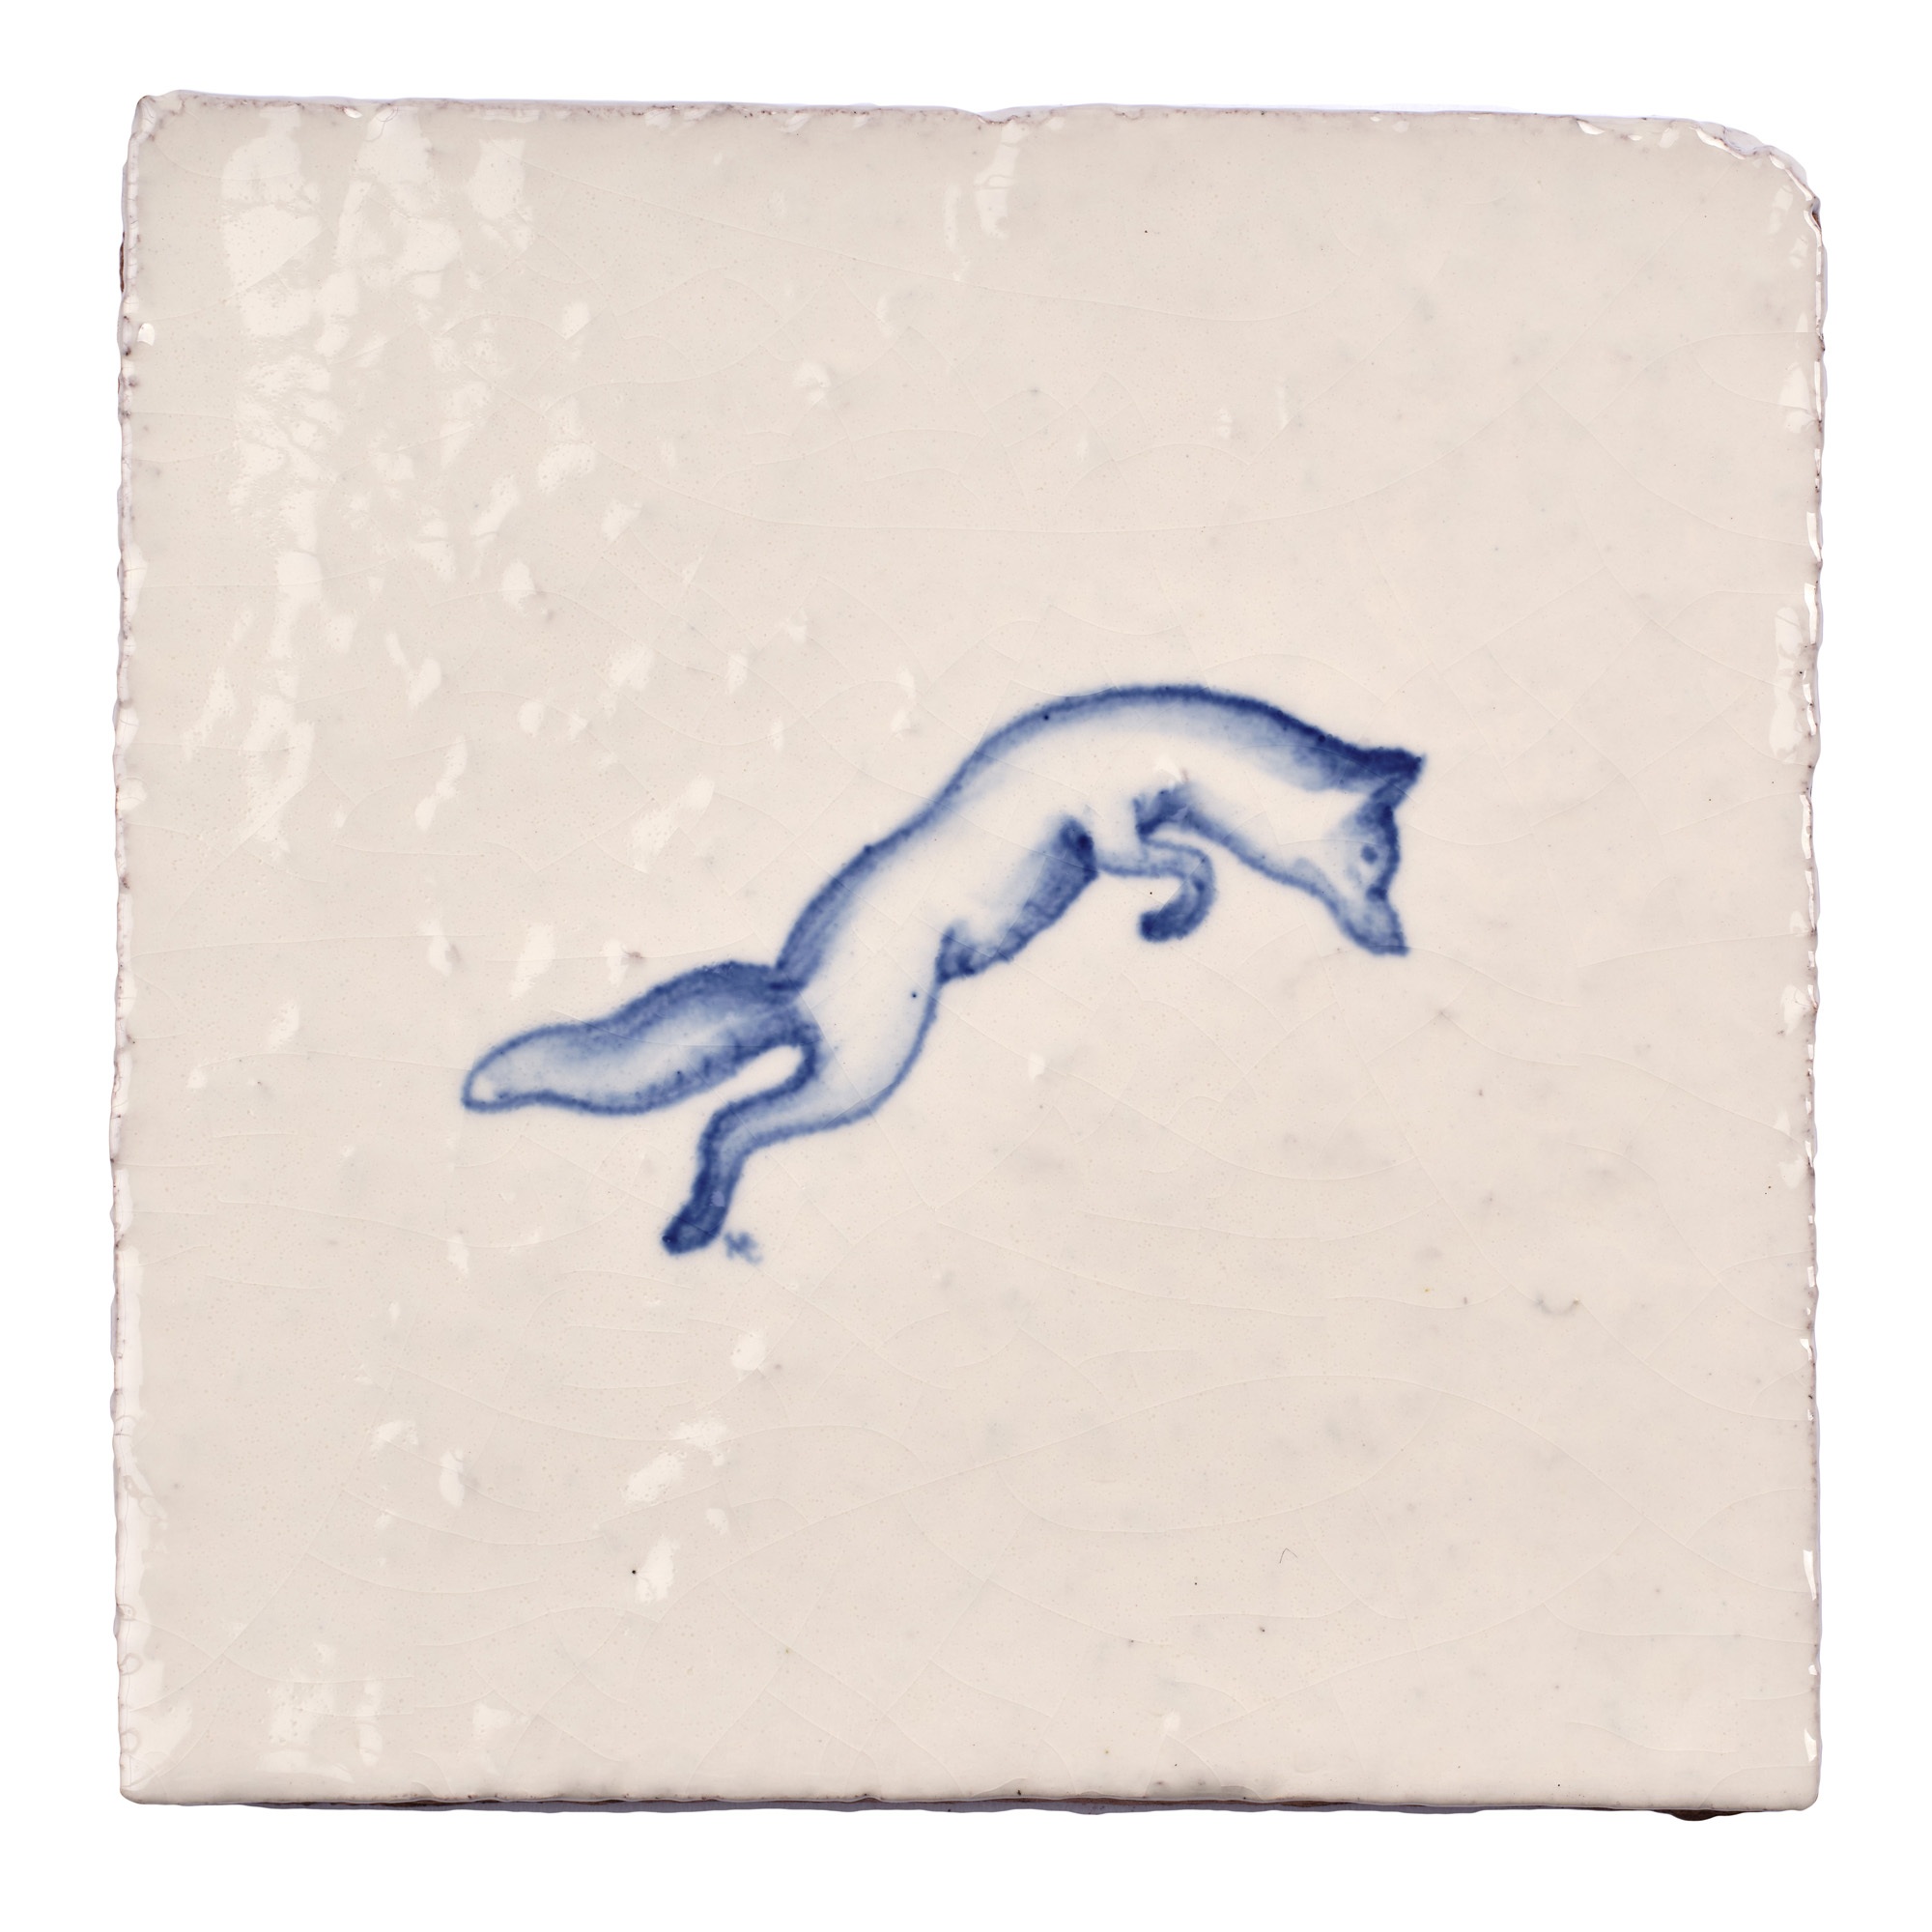 Wilding Fox Square, product variant image